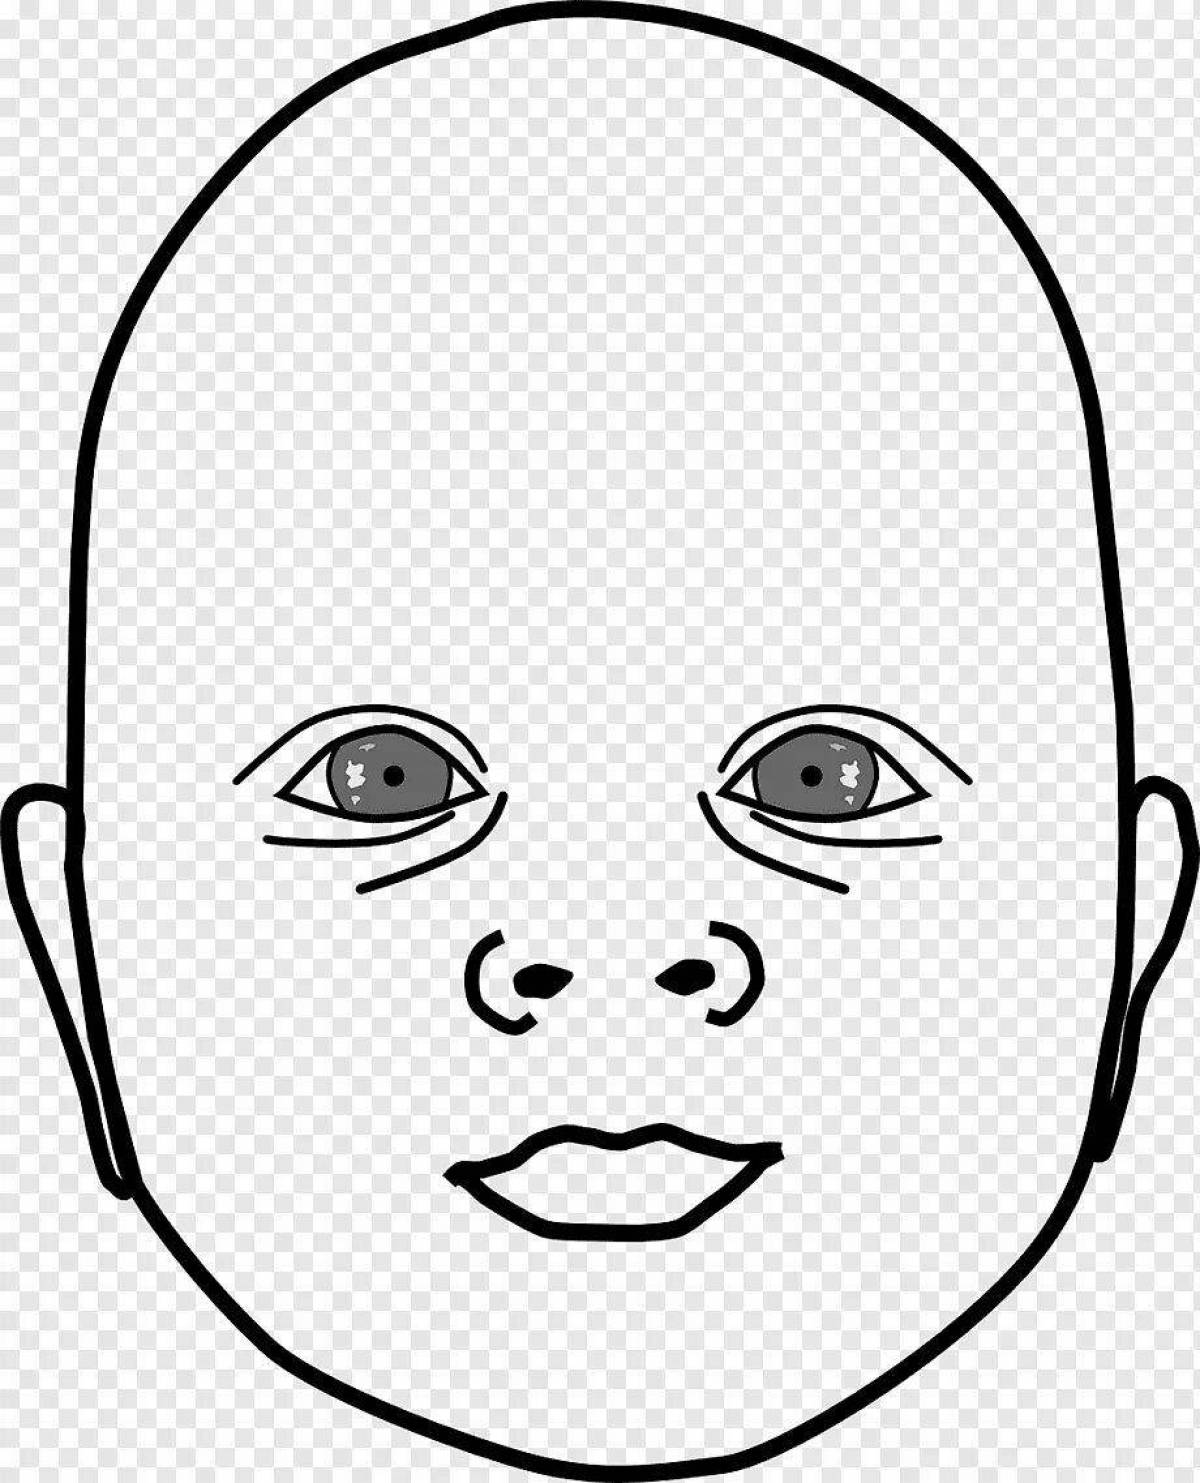 Coloring page charming bald girl